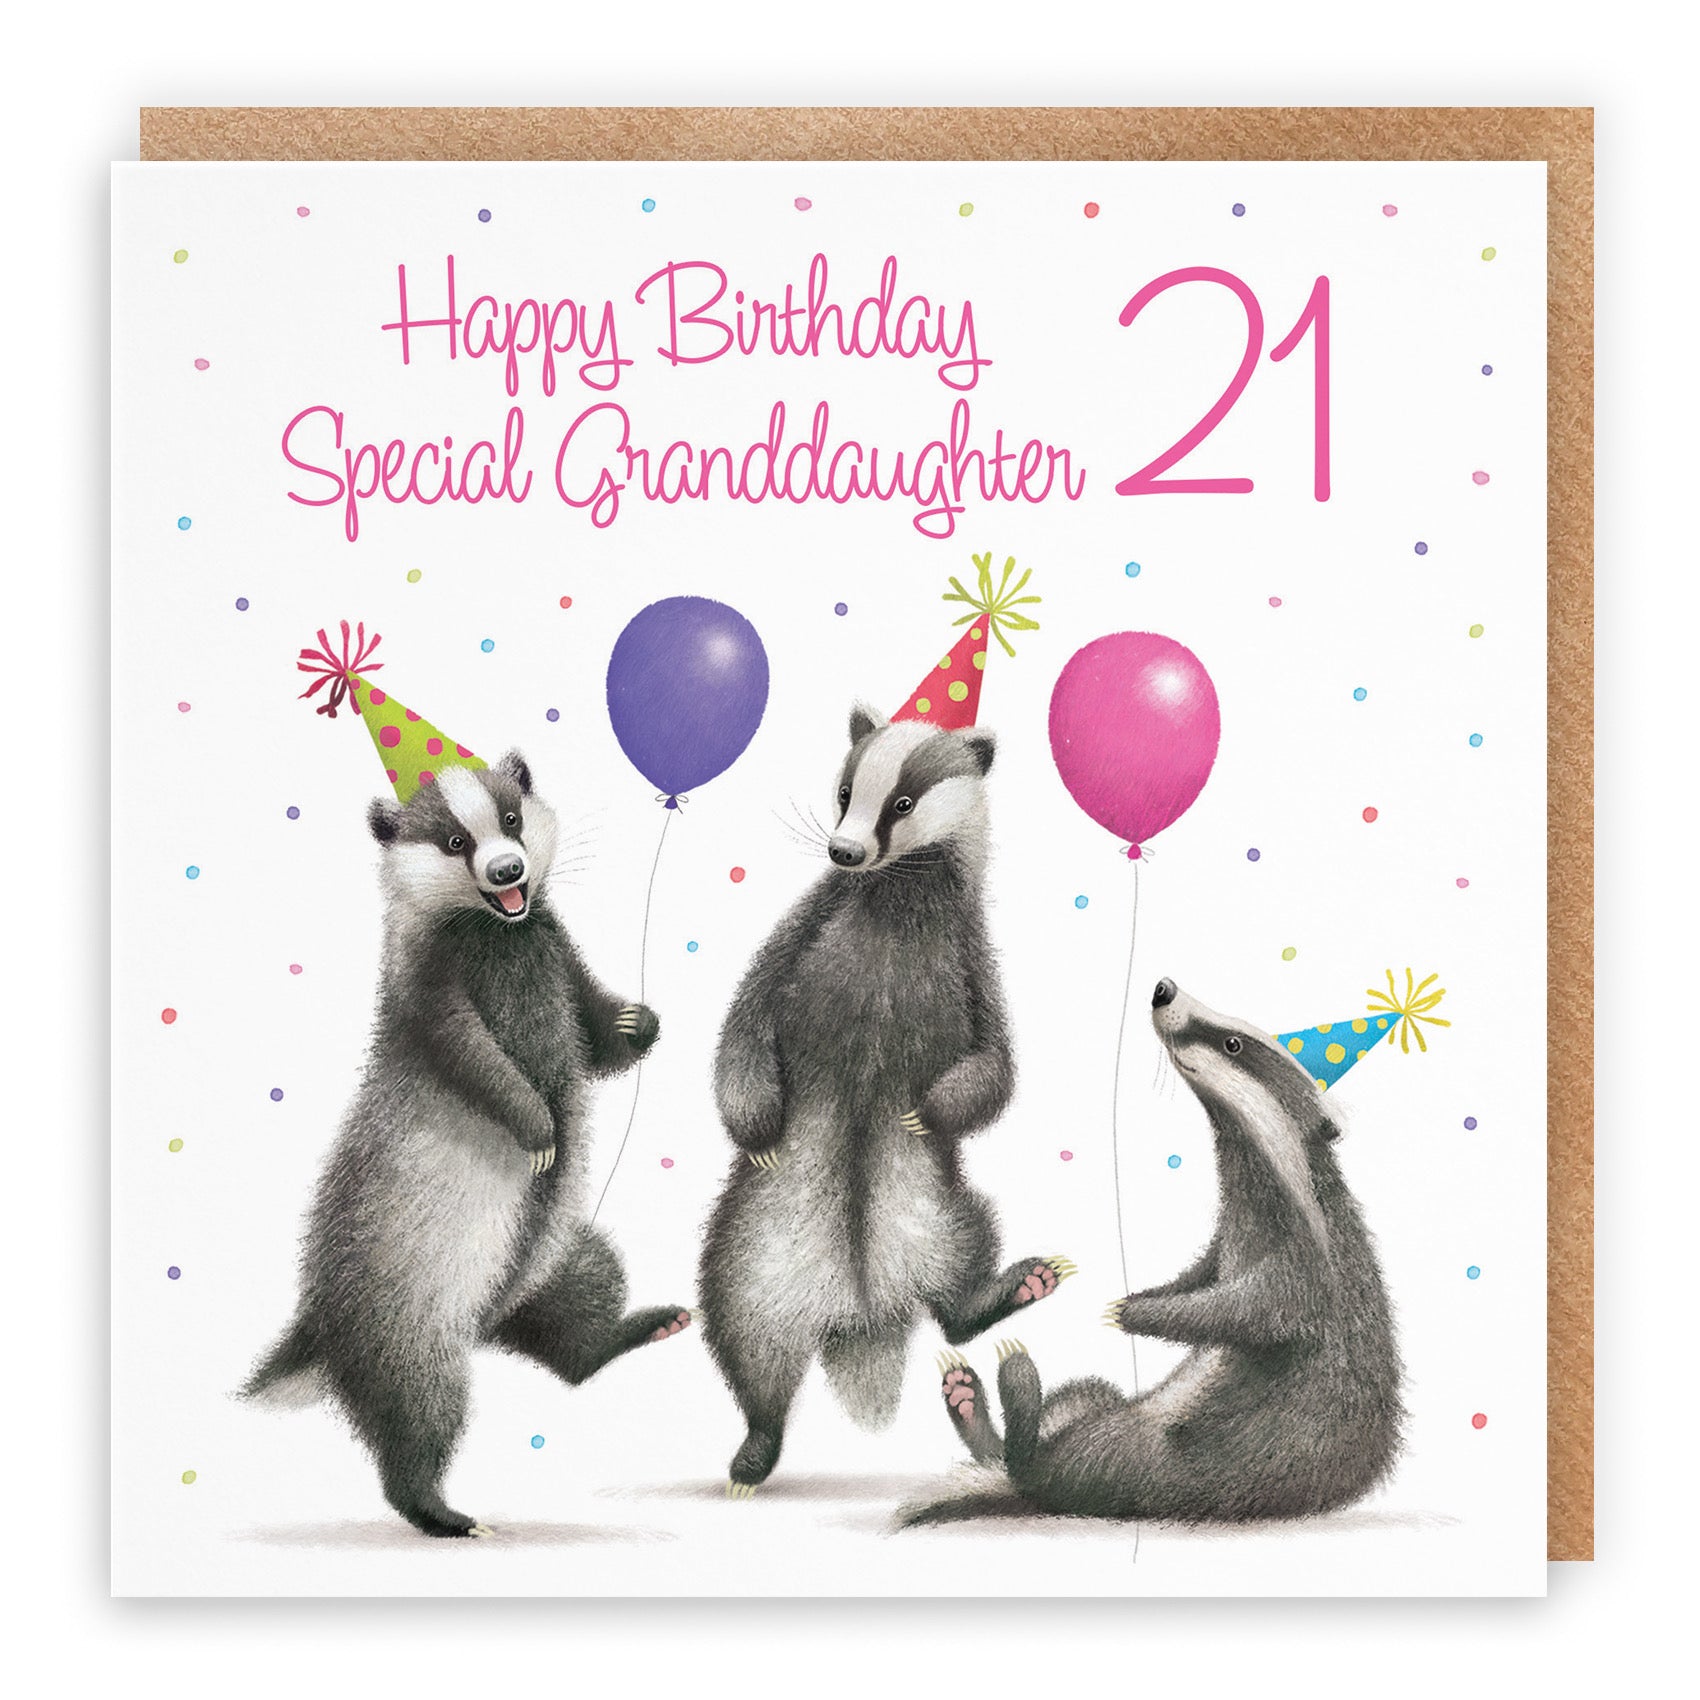 21st Granddaughter Badgers Birthday Card Milo's Gallery - Default Title (B0CRY5QR24)